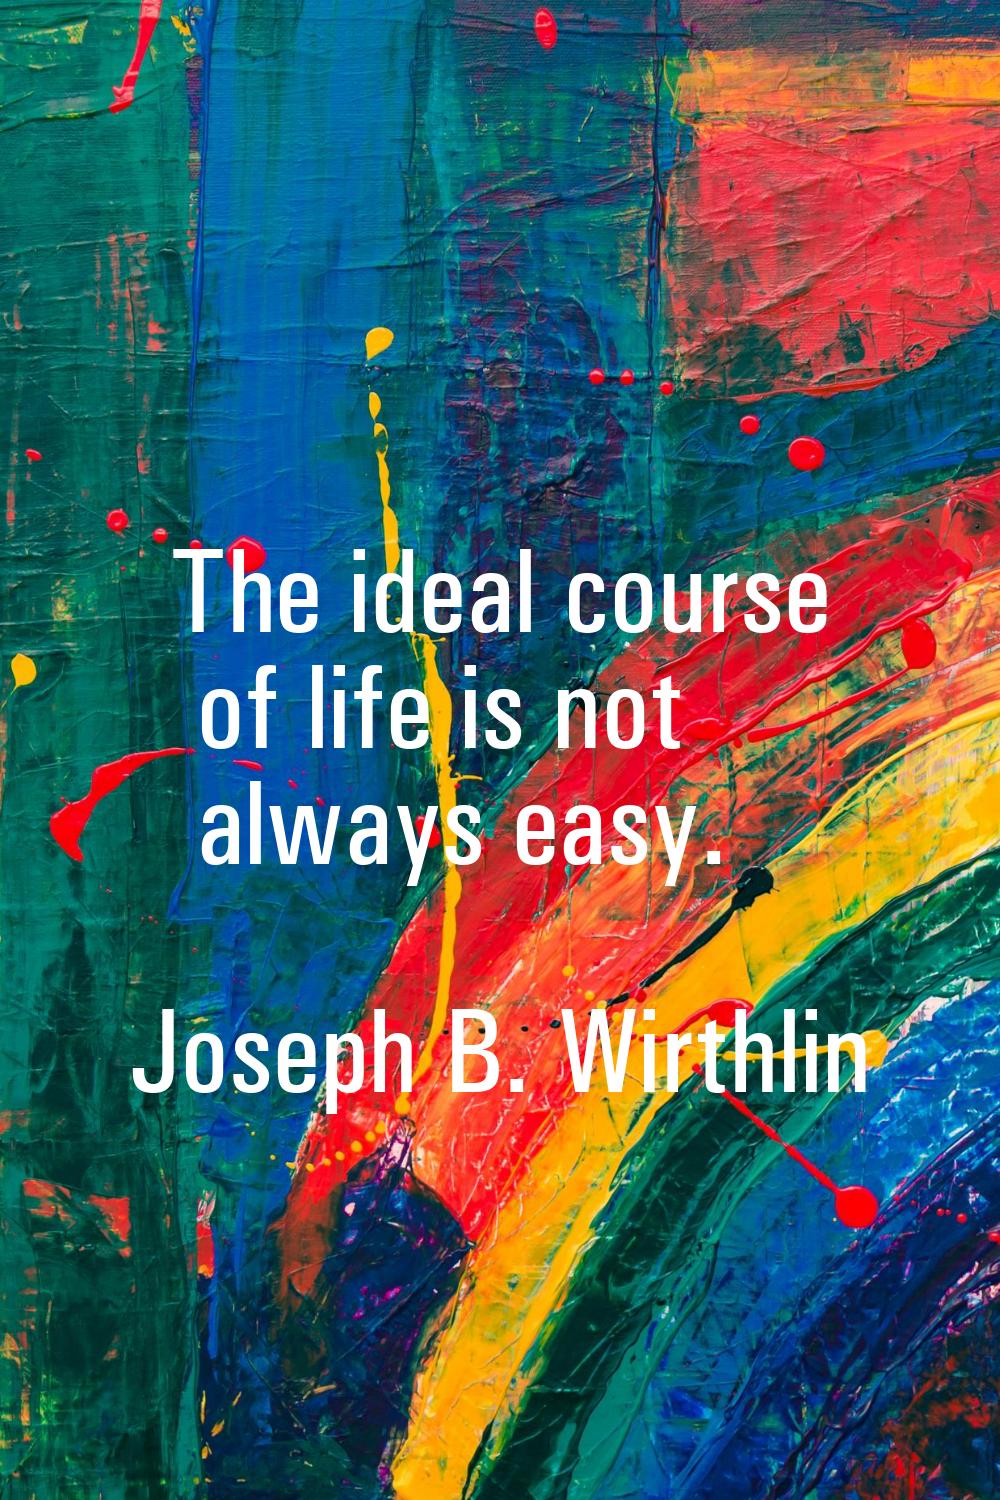 The ideal course of life is not always easy.